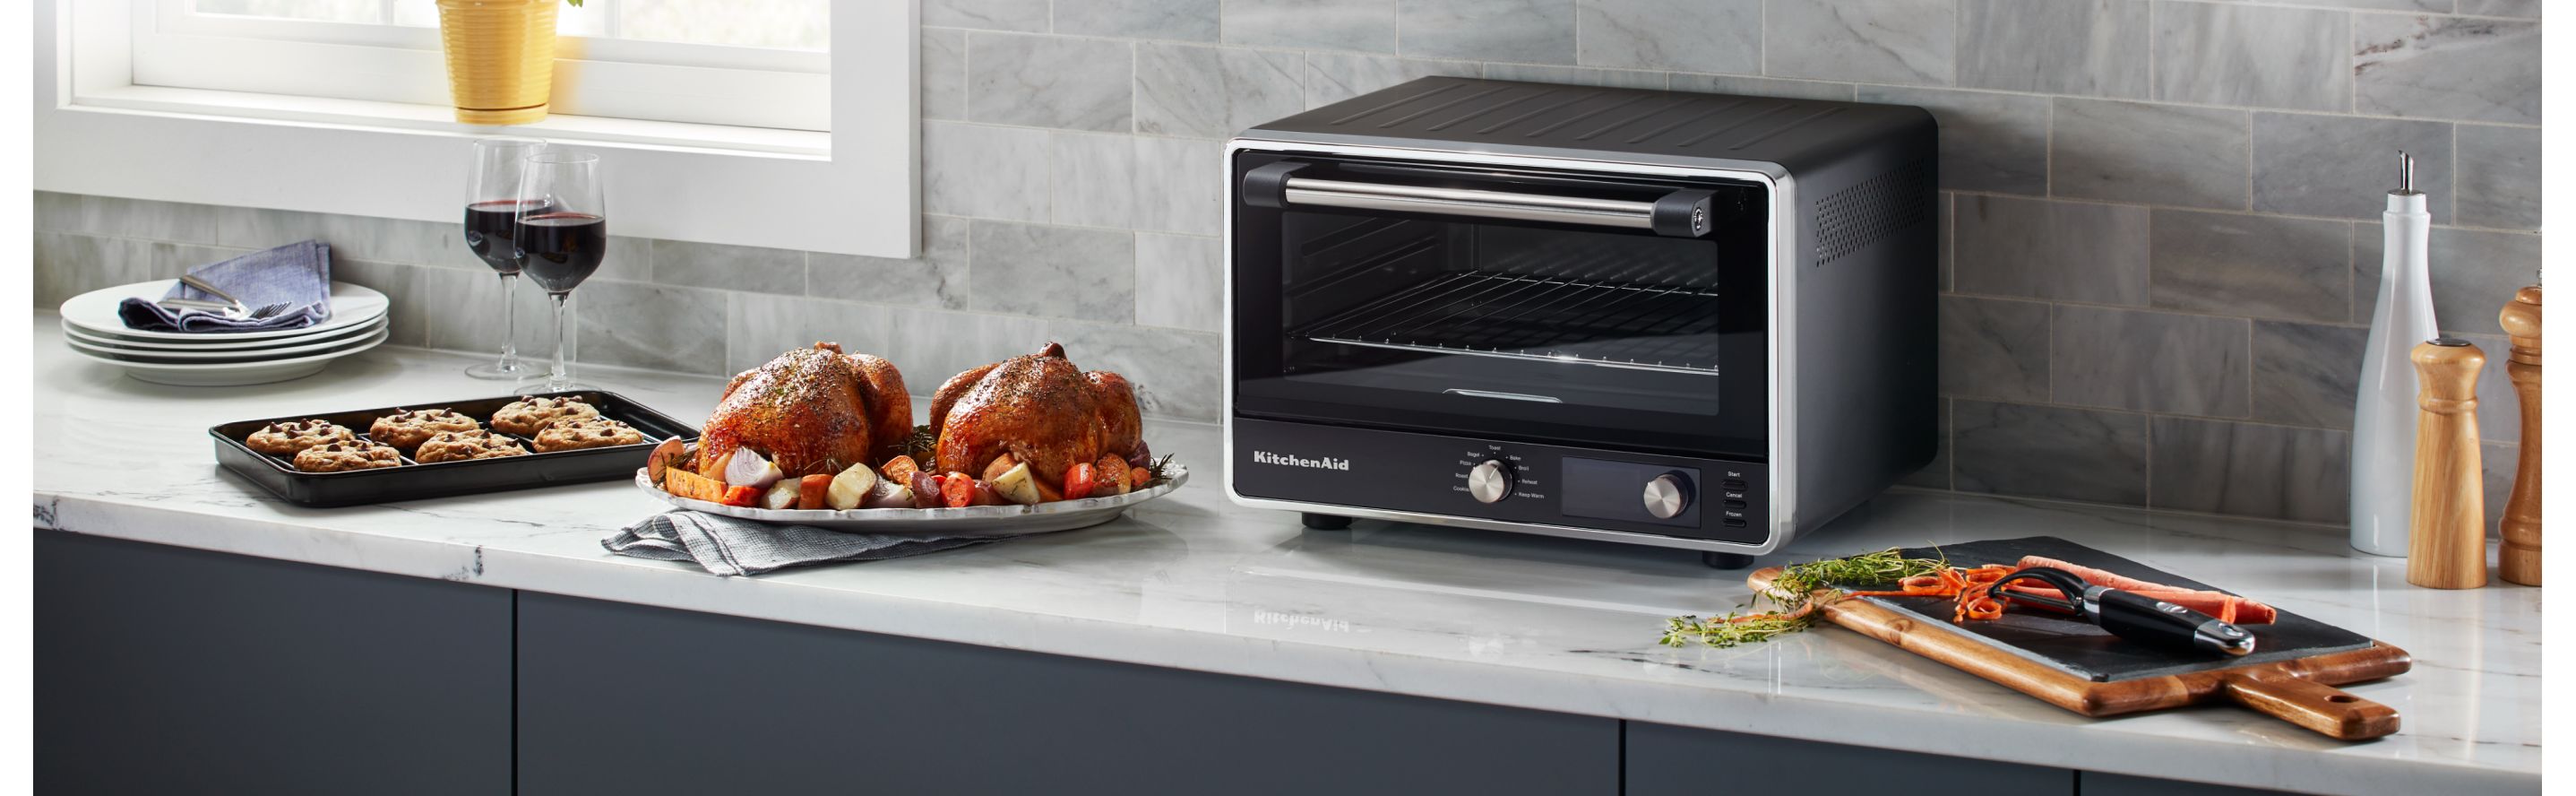 materiaal Eigenaardig Darts Toaster Oven vs. Countertop Oven: What's the Difference? | KitchenAid